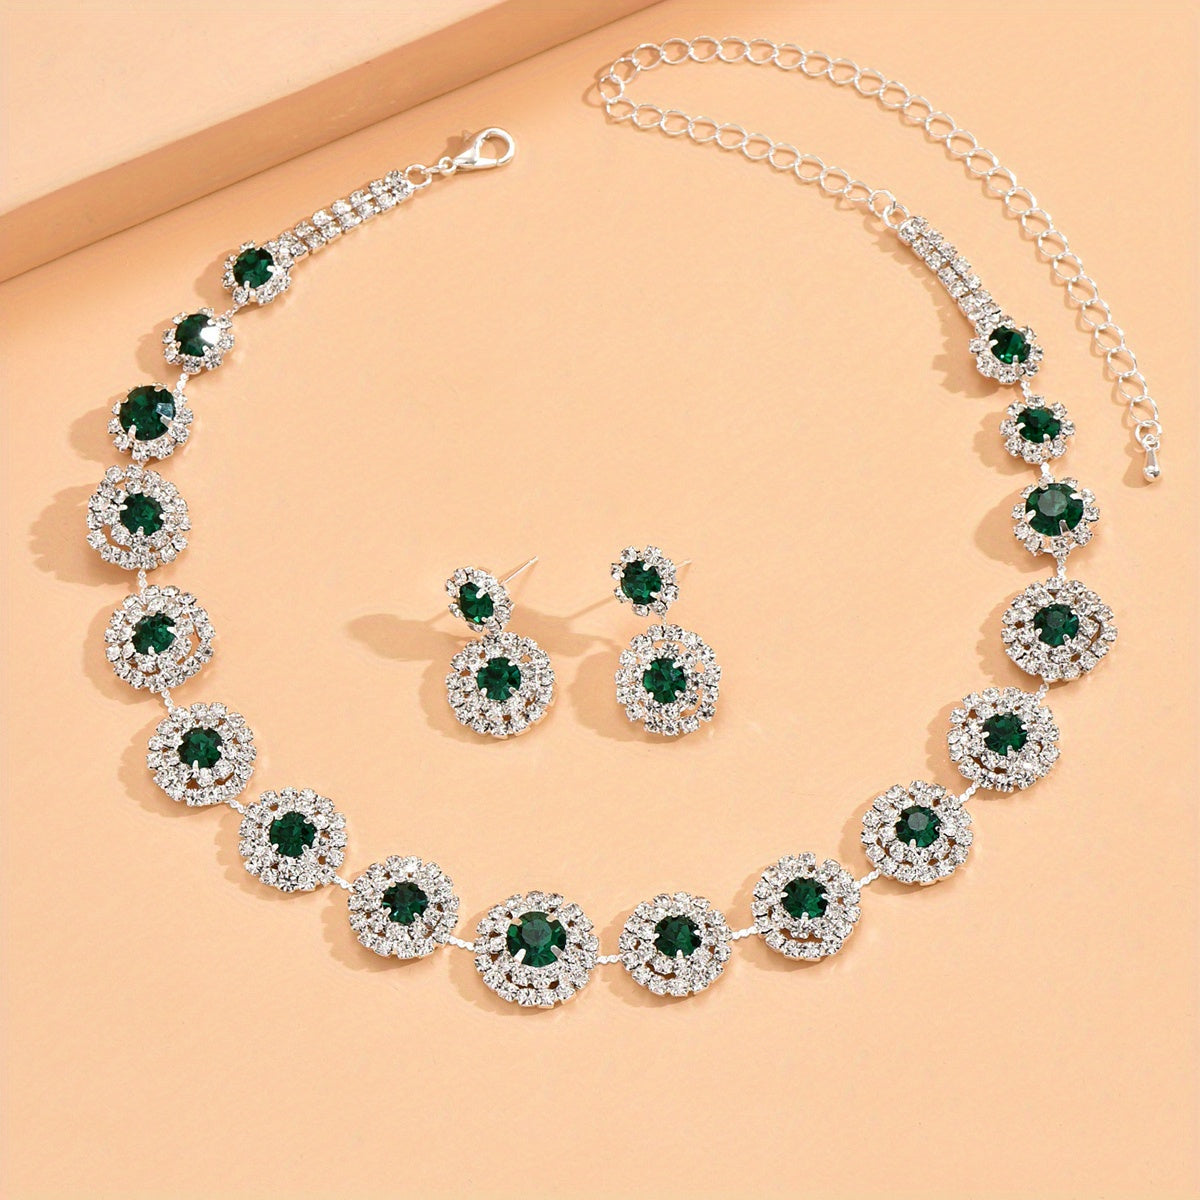 3pcs Elegant Silver Plated Rhinestone Jewelry Set for Evening Parties and Birthdays